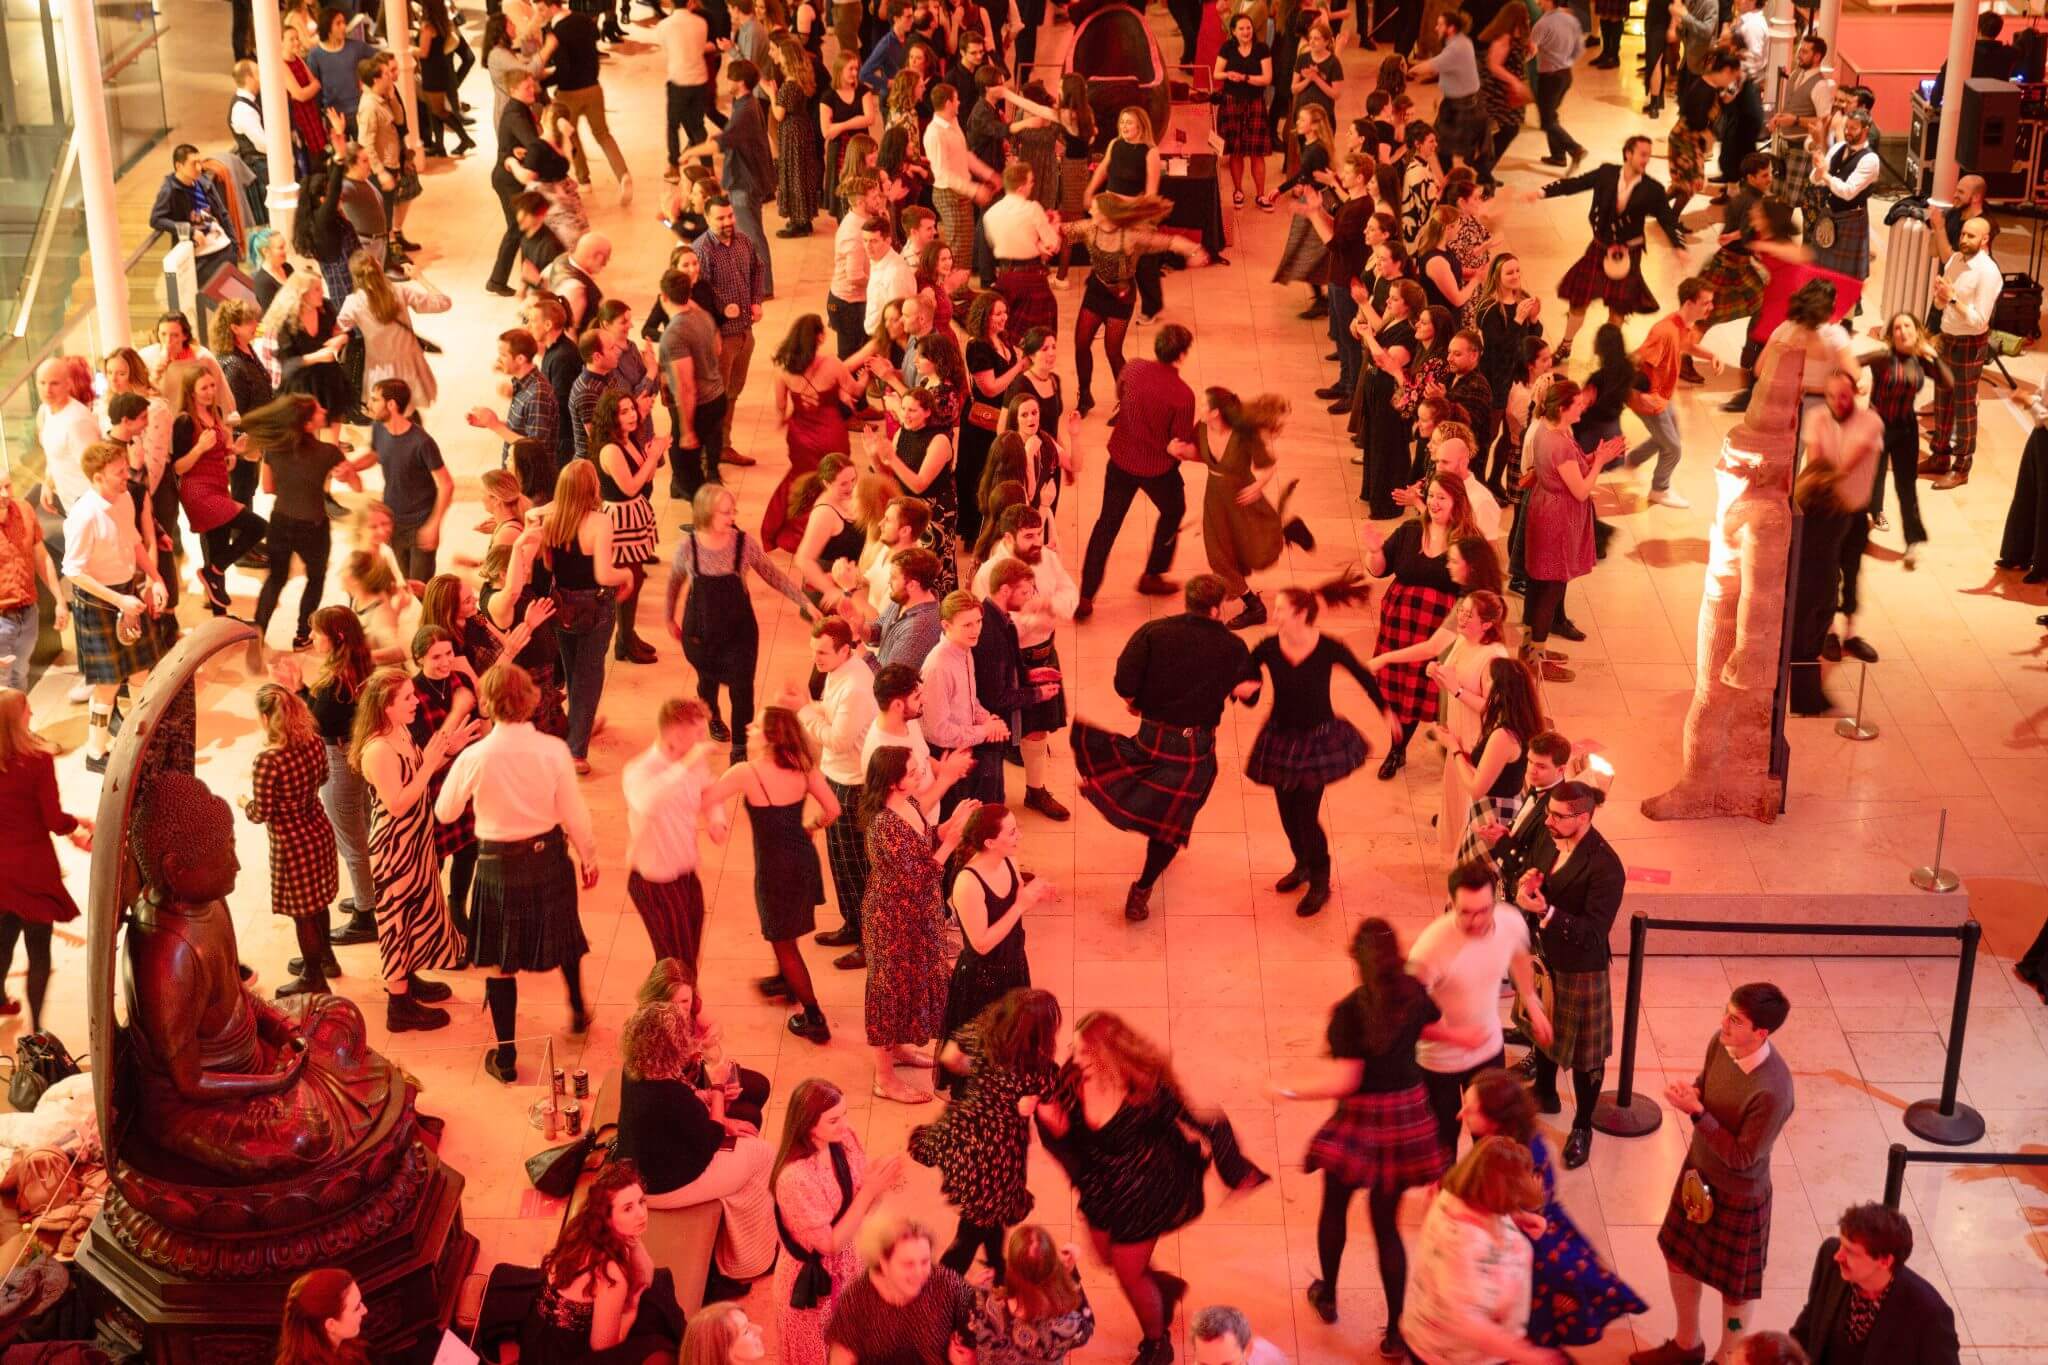 Ceilidh dancing at the National Museum of Scotland